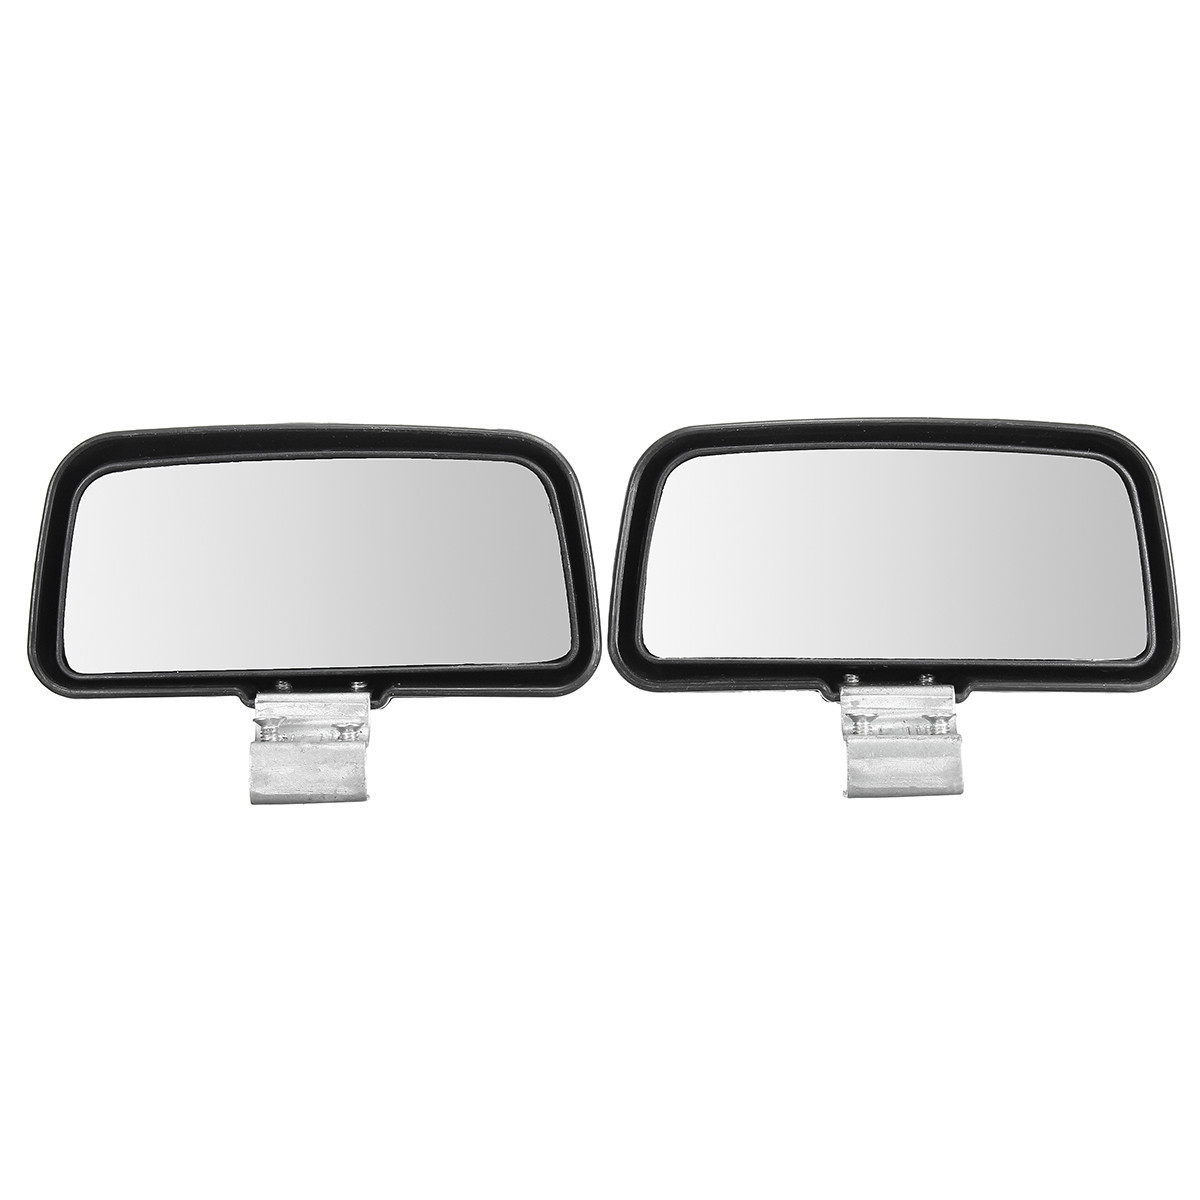 One-Pair-Universal-Blind-Spot-Mirror-Wide-Angle-Rear-Side-View-For-Vehicle-Car-Truck-1105206